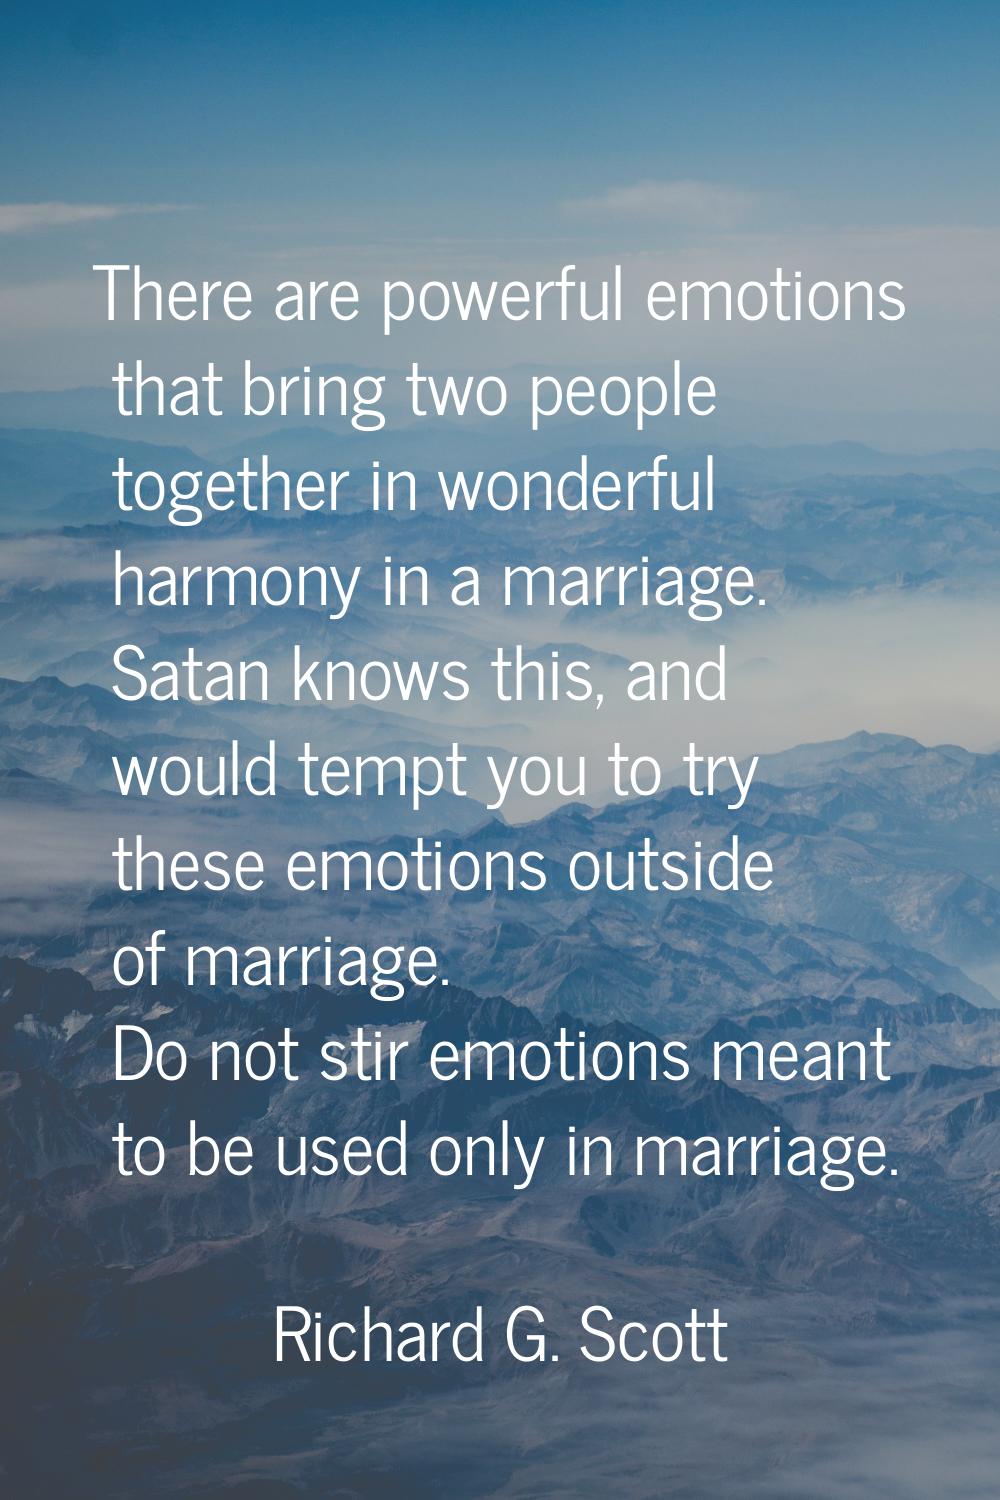 There are powerful emotions that bring two people together in wonderful harmony in a marriage. Sata